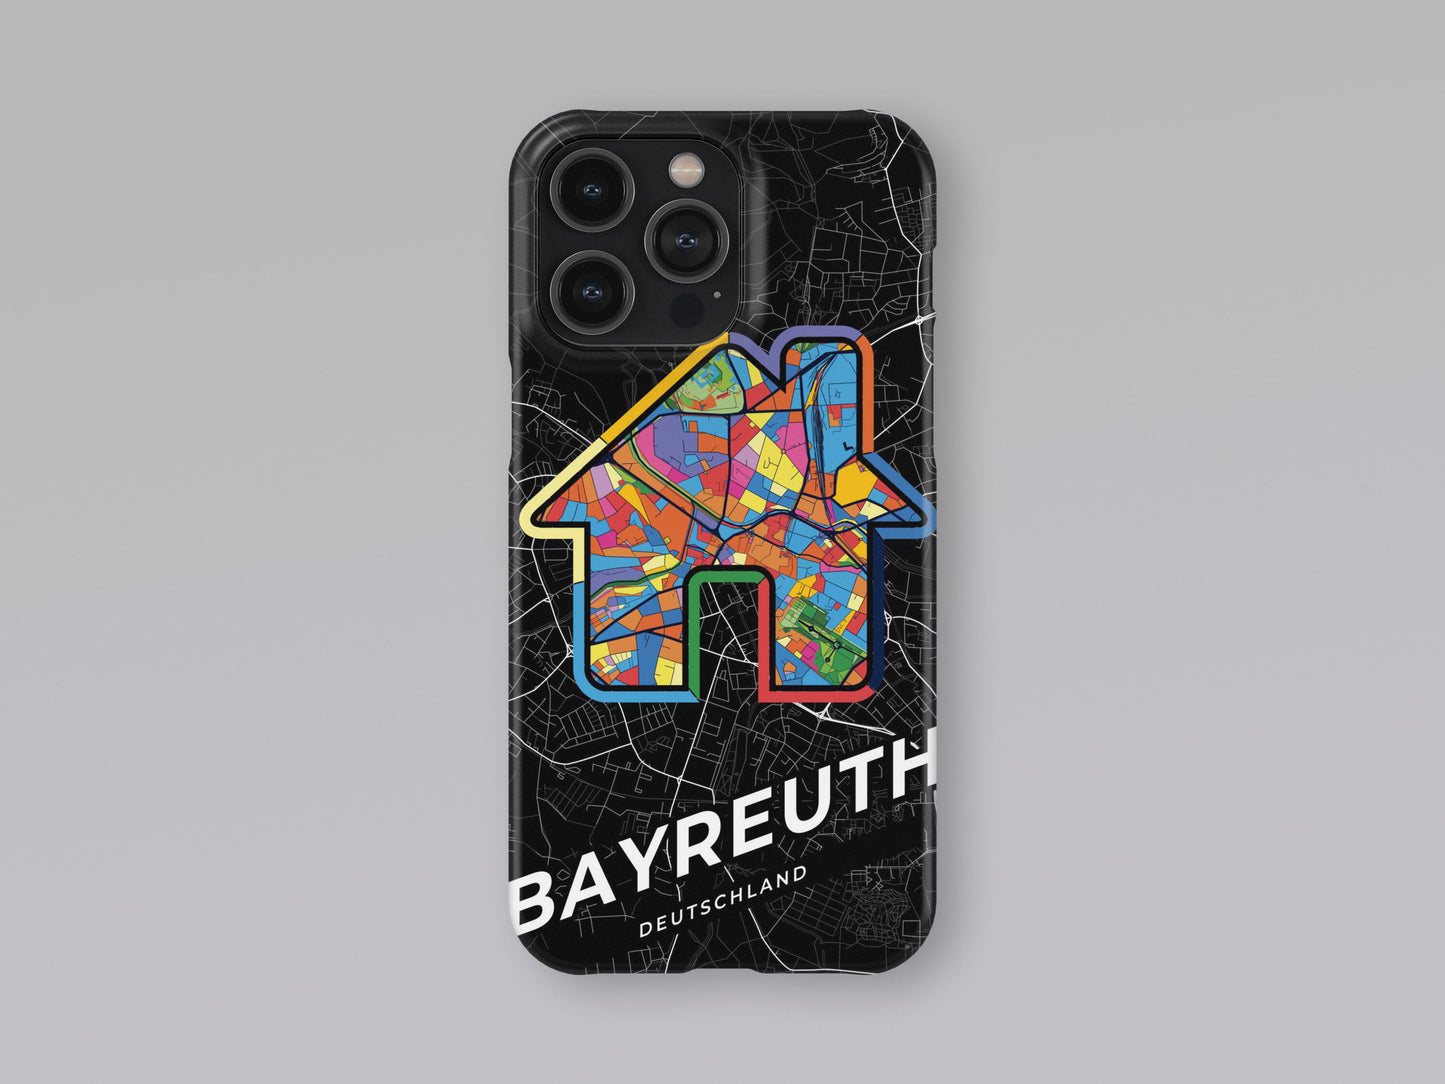 Bayreuth Deutschland slim phone case with colorful icon. Birthday, wedding or housewarming gift. Couple match cases. 3